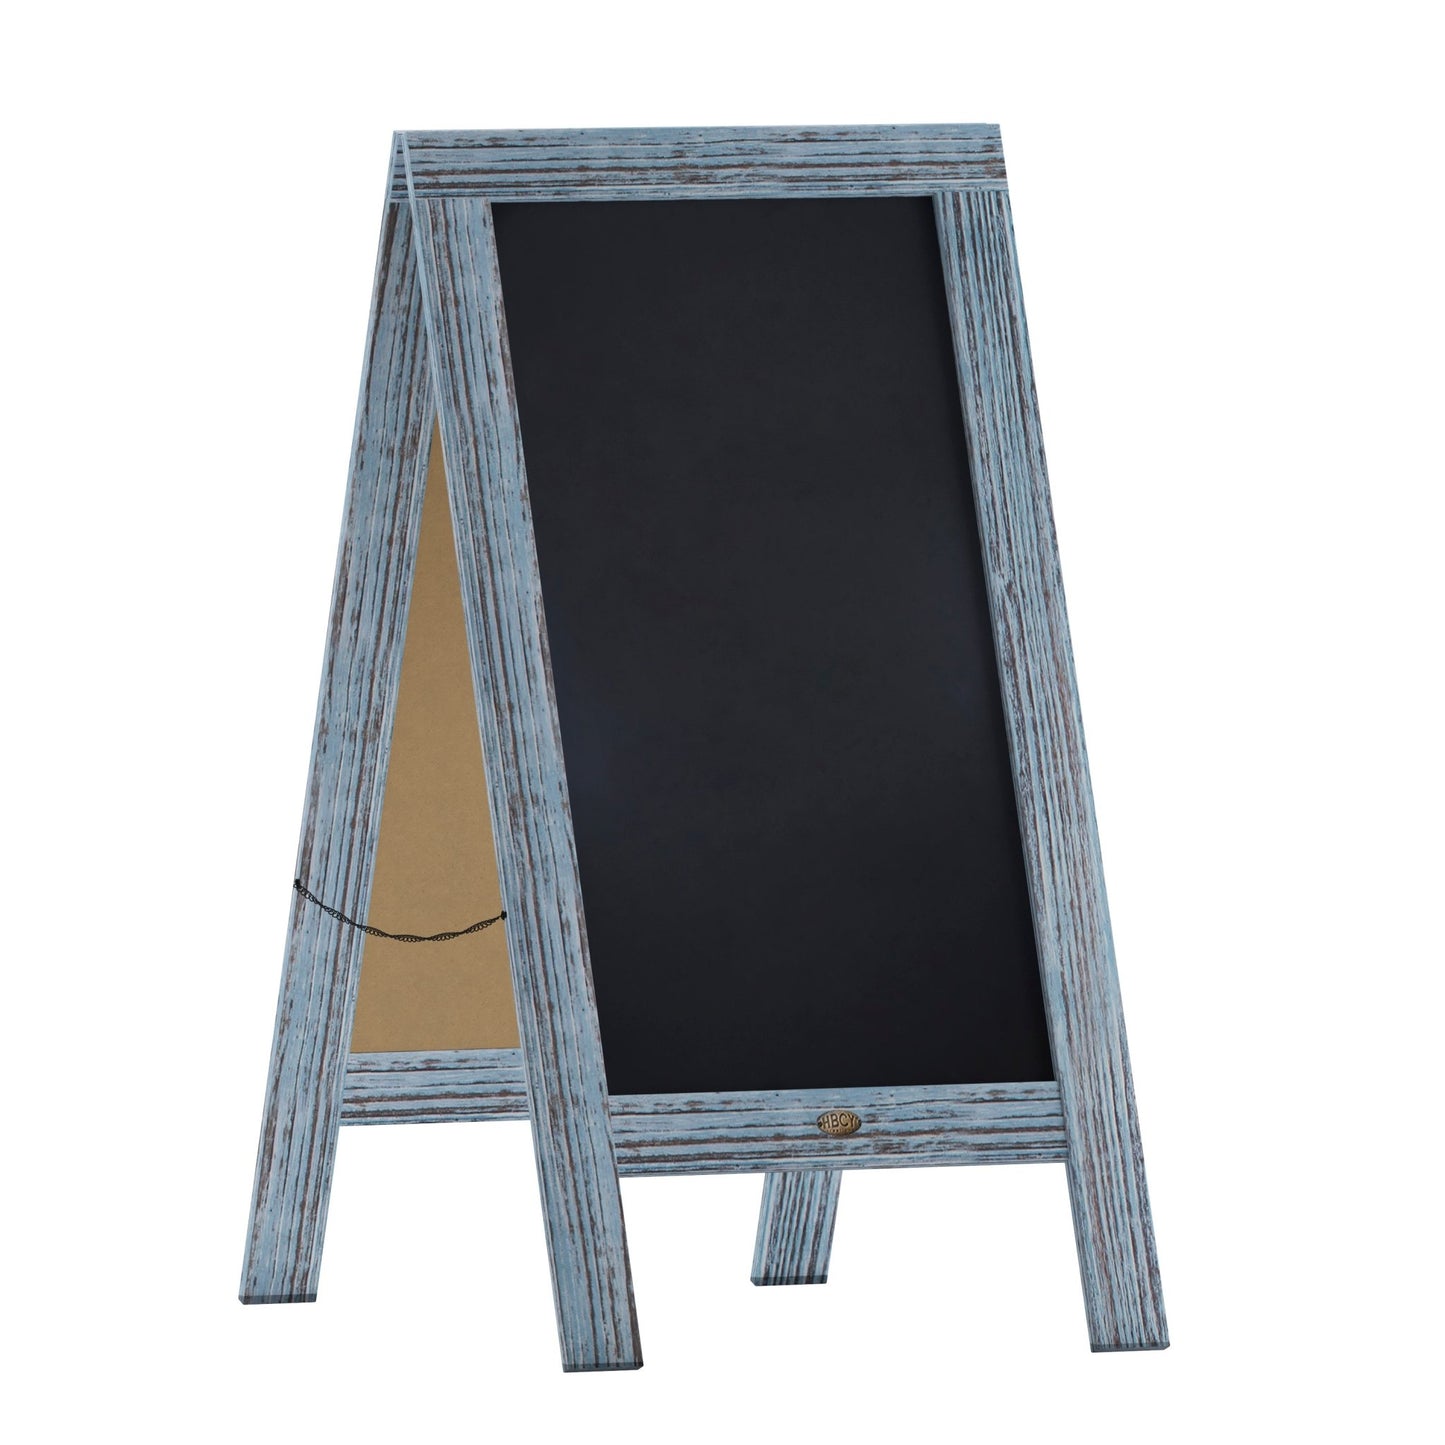 Canterbury 40" x 20" Vintage Wooden A-Frame Magnetic Indoor/Outdoor Chalkboard Sign, Freestanding Double Sided Extra Large Message Board, Black - SchoolOutlet